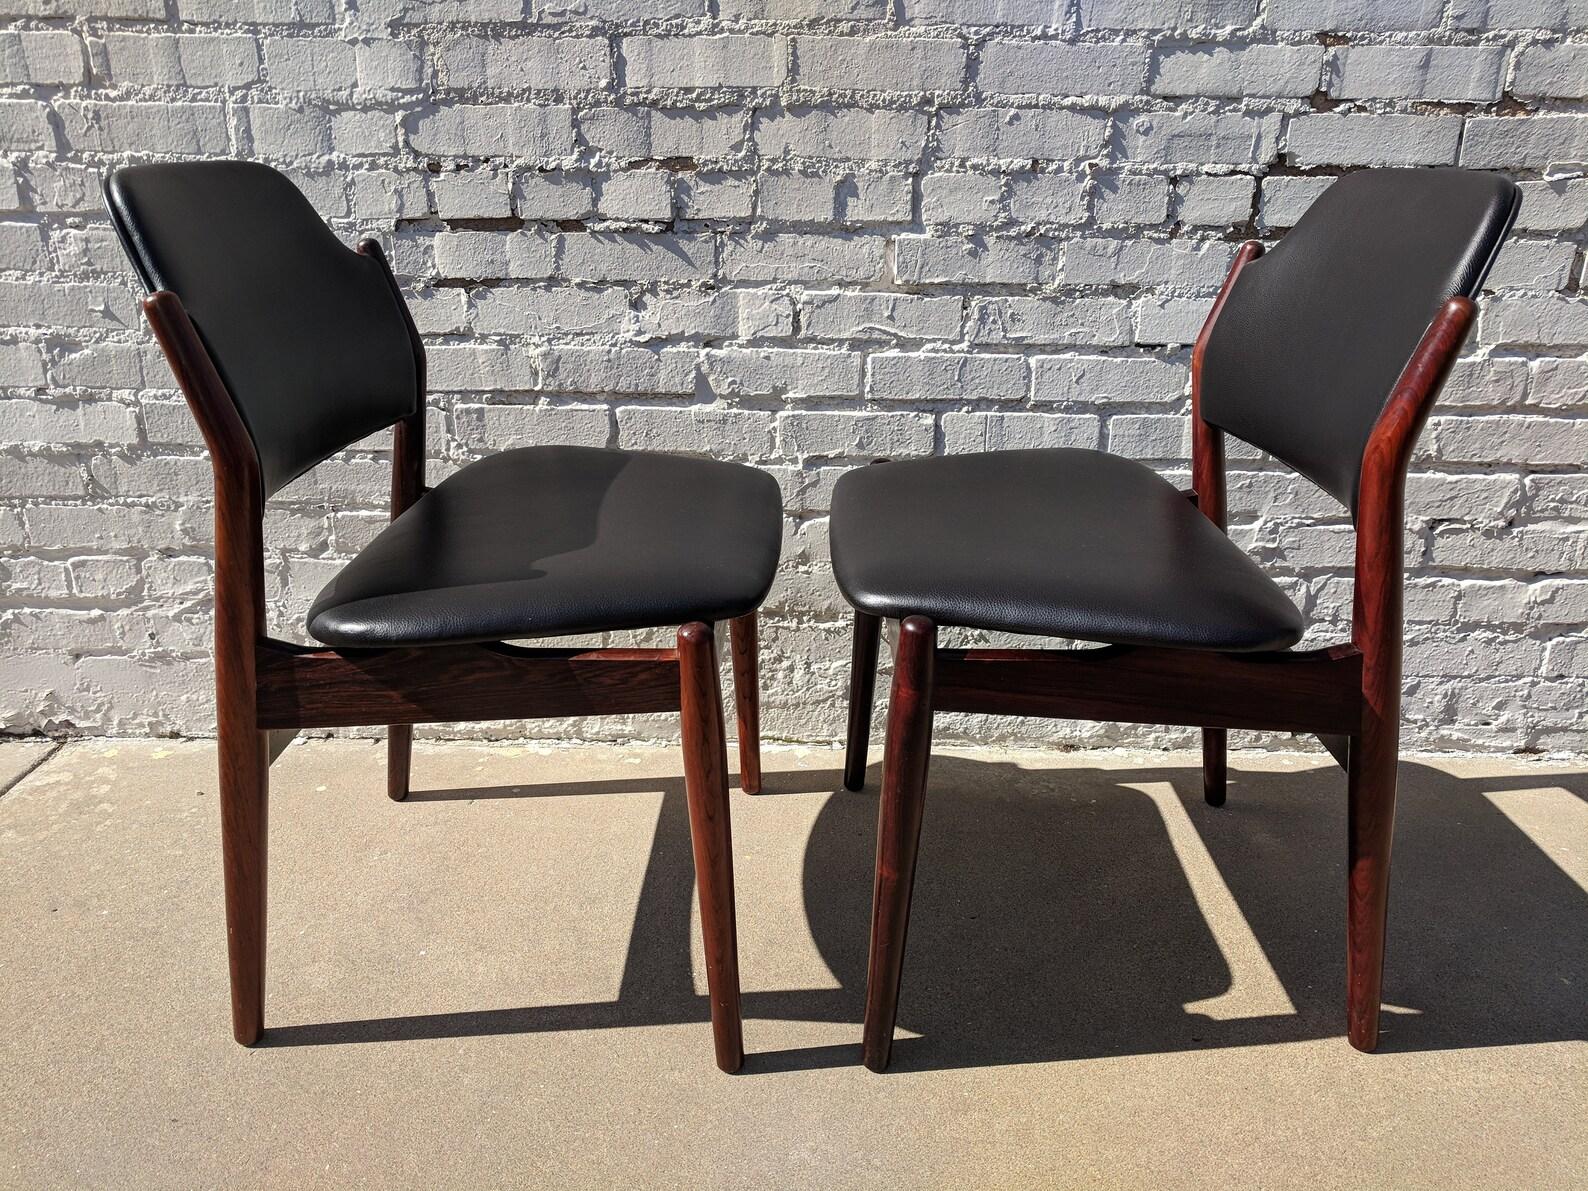 Mid Century Modern Arne Vodder Dining Table and Chairs

Above average condition and structurally sound. Table and inserts have some light finish wear and a couple scratches which should be visible in the listing pictures. Chairs are newly recovered.